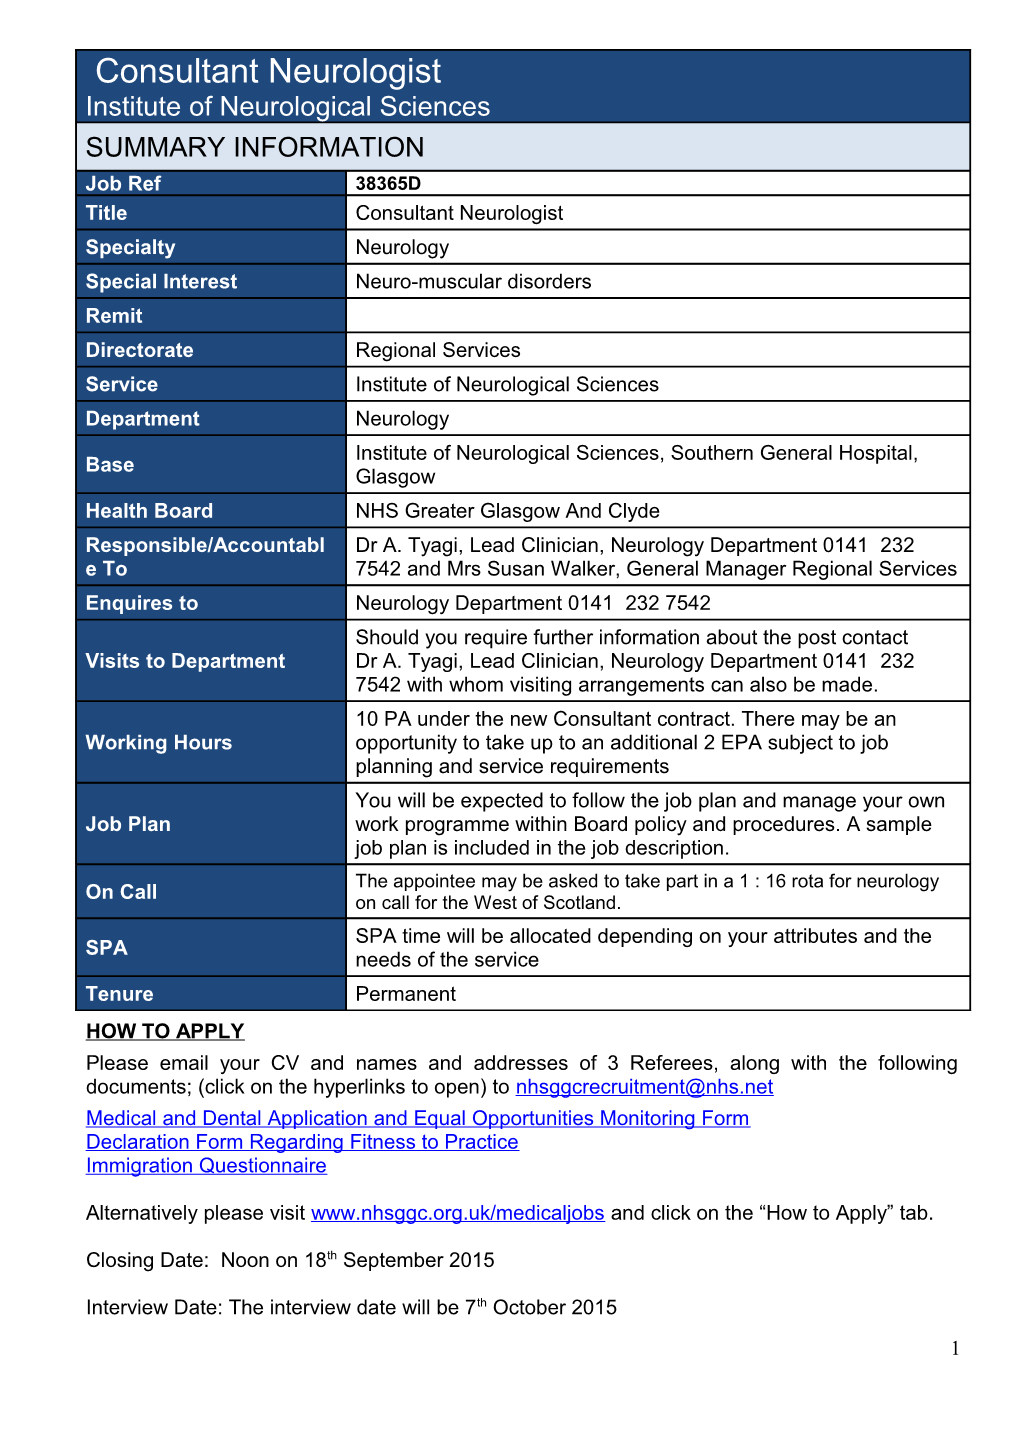 Medical and Dental Application and Equal Opportunities Monitoring Form